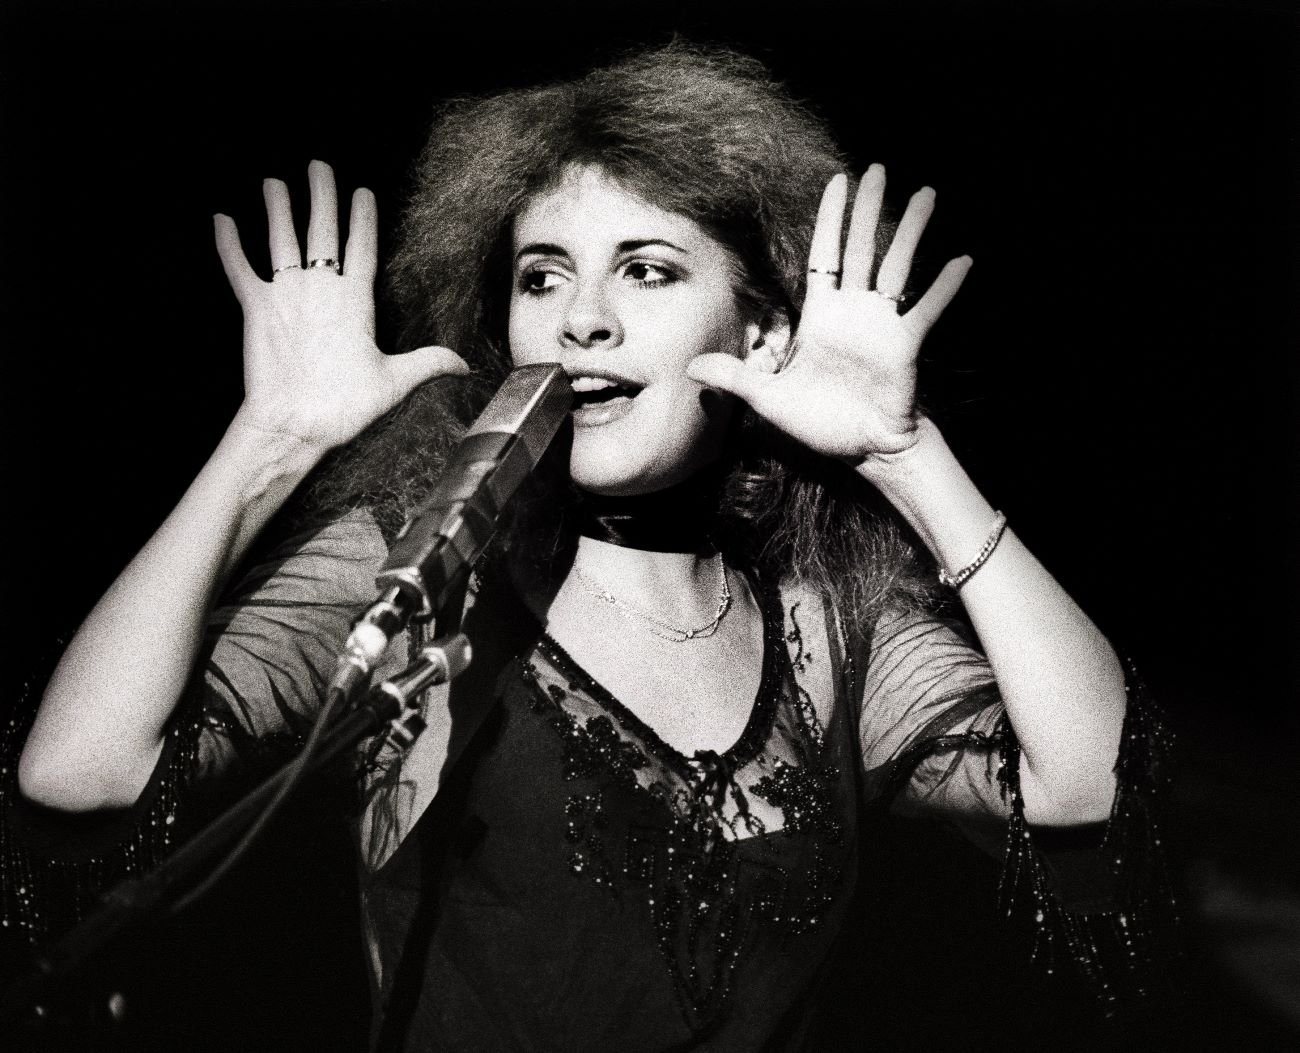 Stevie Nicks wears a lace top and holds her hands near her face while singing into a microphone.